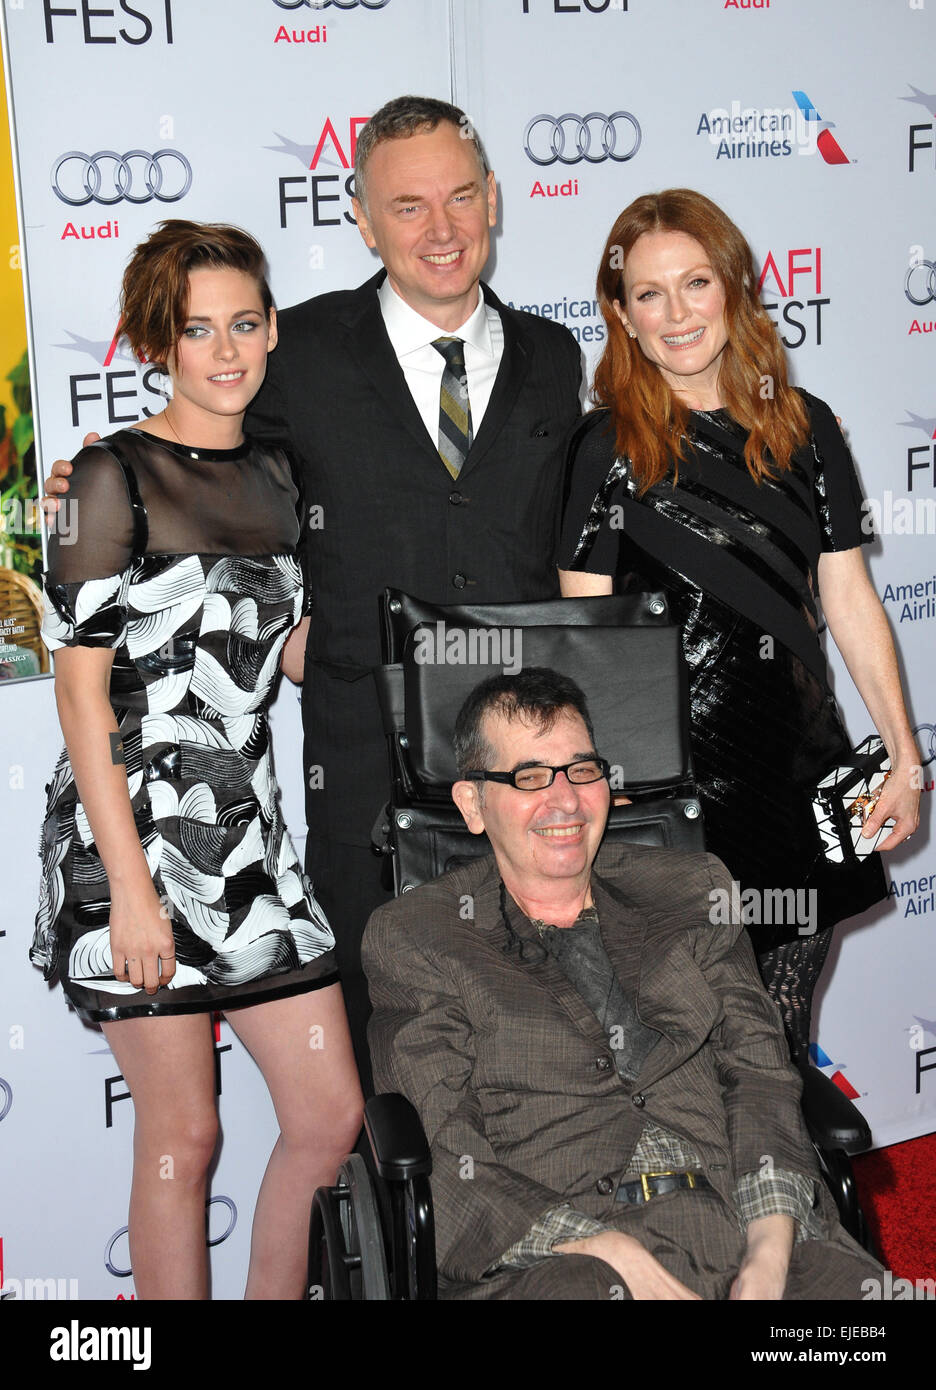 LOS ANGELES, CA - NOVEMBER 12, 2014: Kristen Stewart & Julianne Moore with directors Wash Westmoreland & Richard Glatzer (front) at the premiere of their movie 'Still Alice' as part of the AFI FEST 2014 at the Dolby Theatre, Hollywood. Stock Photo